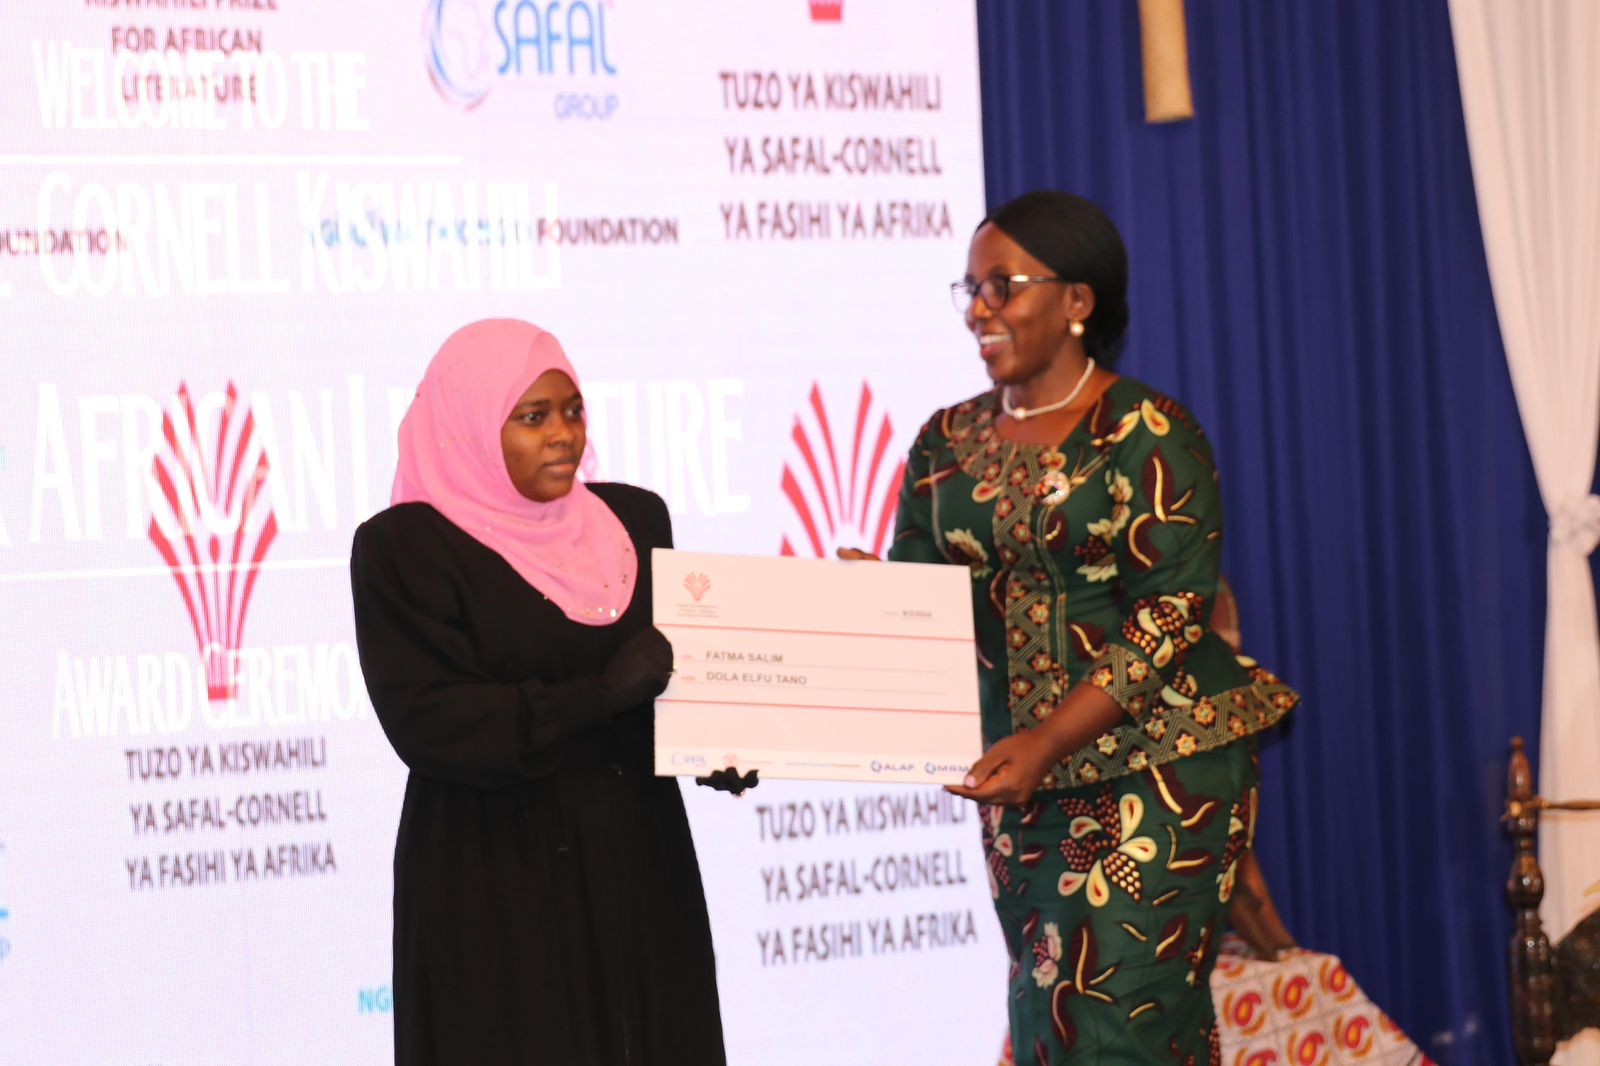 Historic win for first female winner in Safal-Cornell Kiswahili Prize